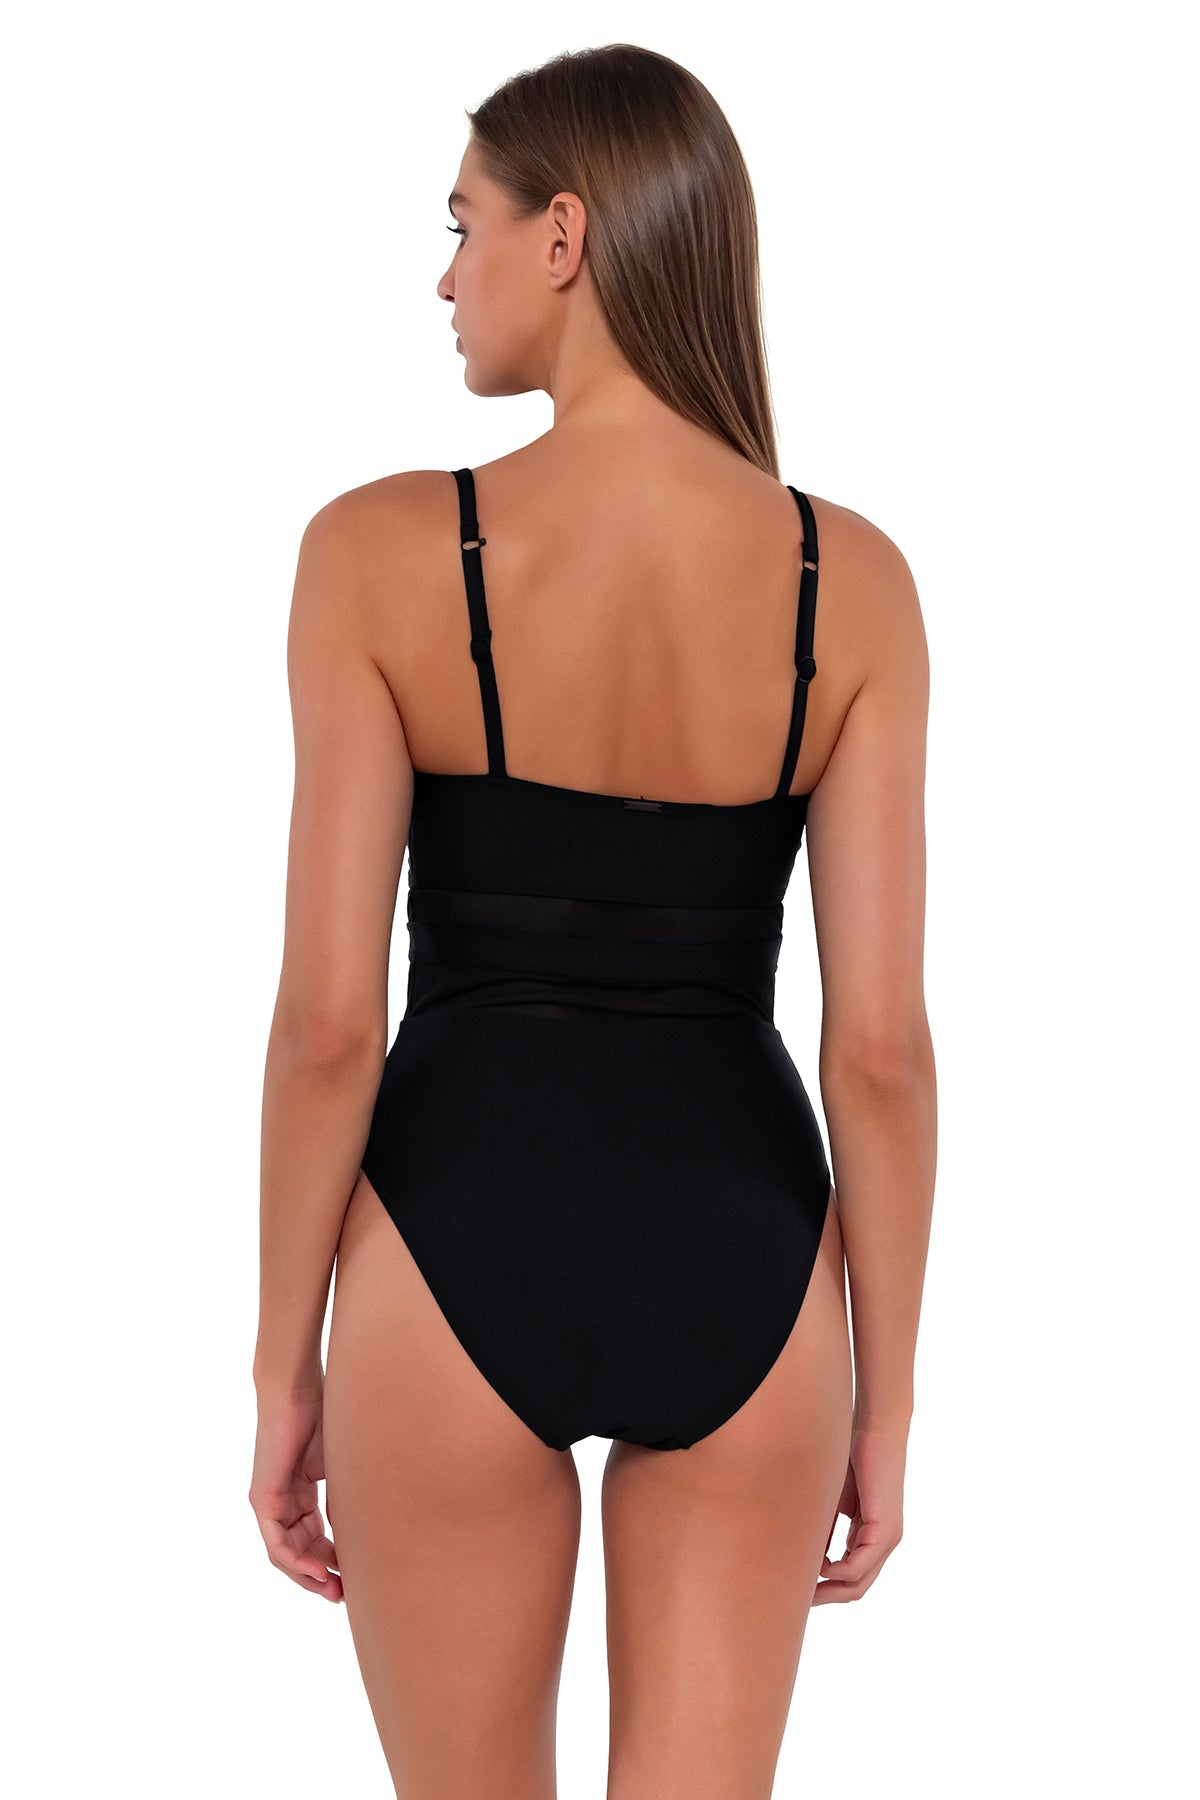 Back pose #1 of Daria wearing Sunsets Black Alexia One Piece